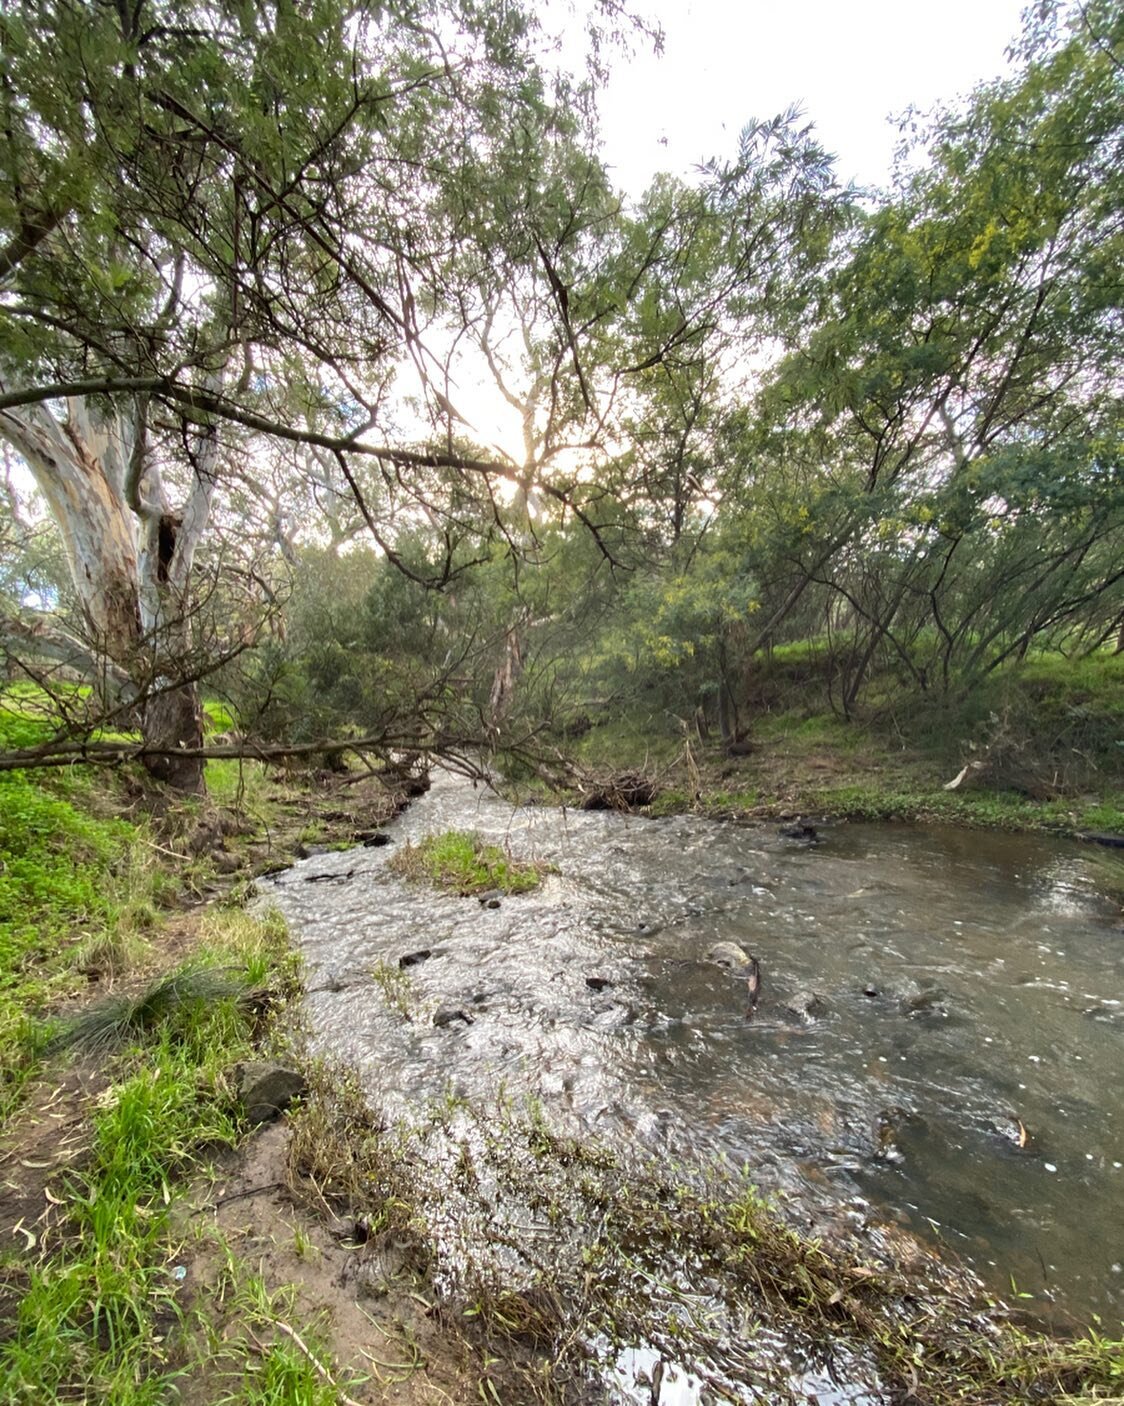 I love exploring these little pockets along the creek, inspiration is everywhere.
For me the sound of water rushing over rocks and the yellow crested cockatoos chatting in the trees are the most relaxing sounds there are.
.
.
#nature #formanart #insp